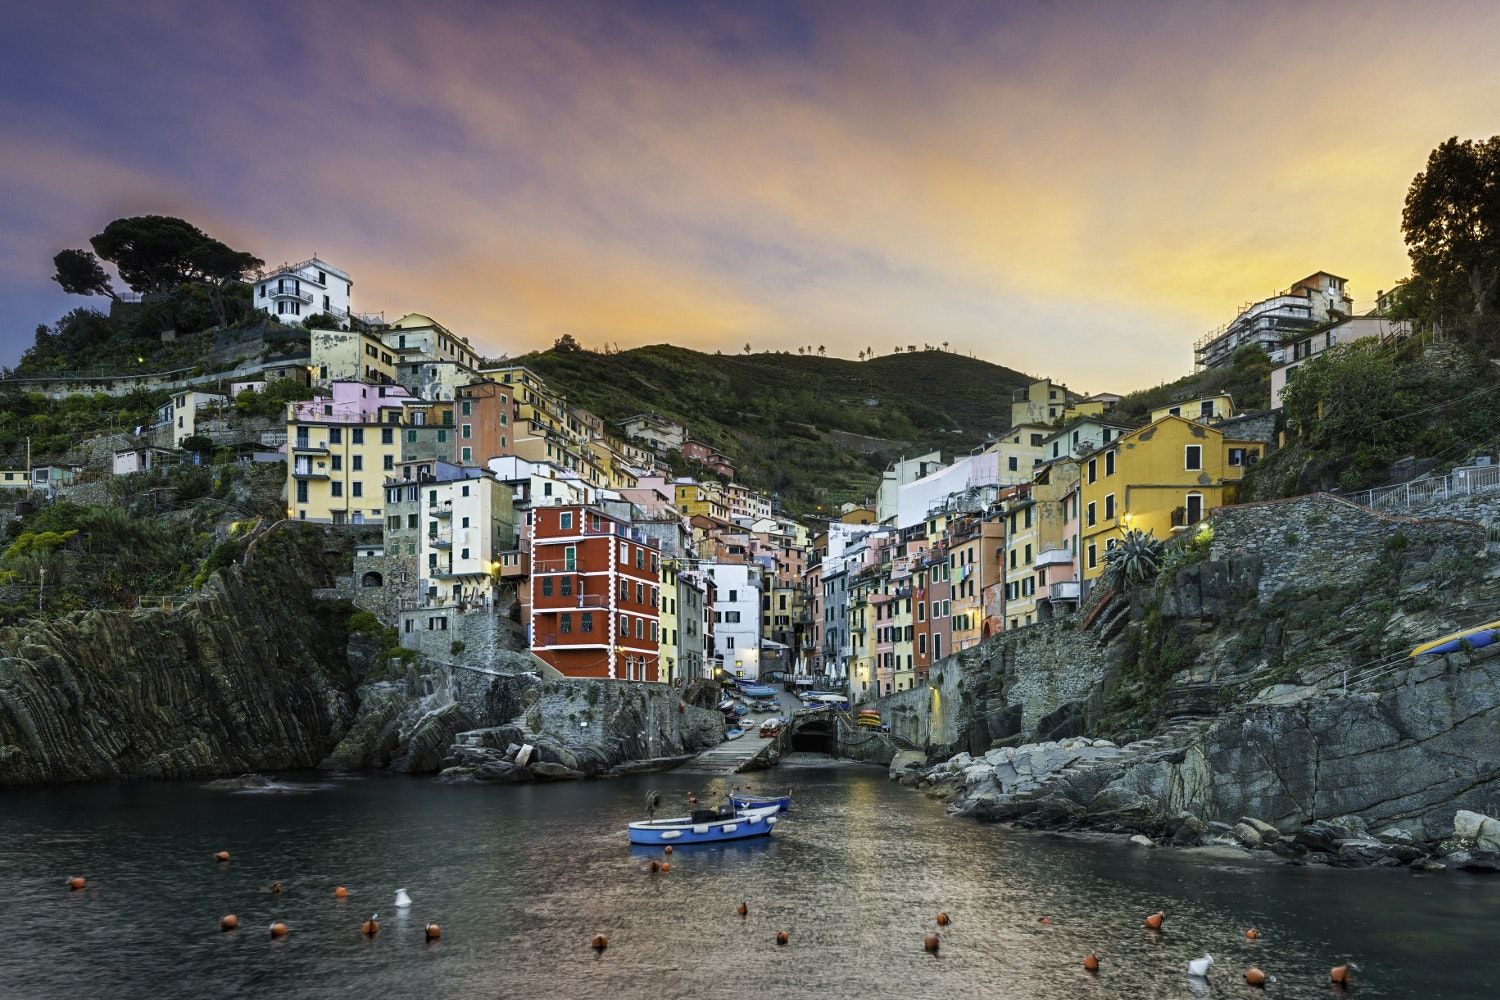 Italy's fabulous five: planning your visit to the Cinque Terre